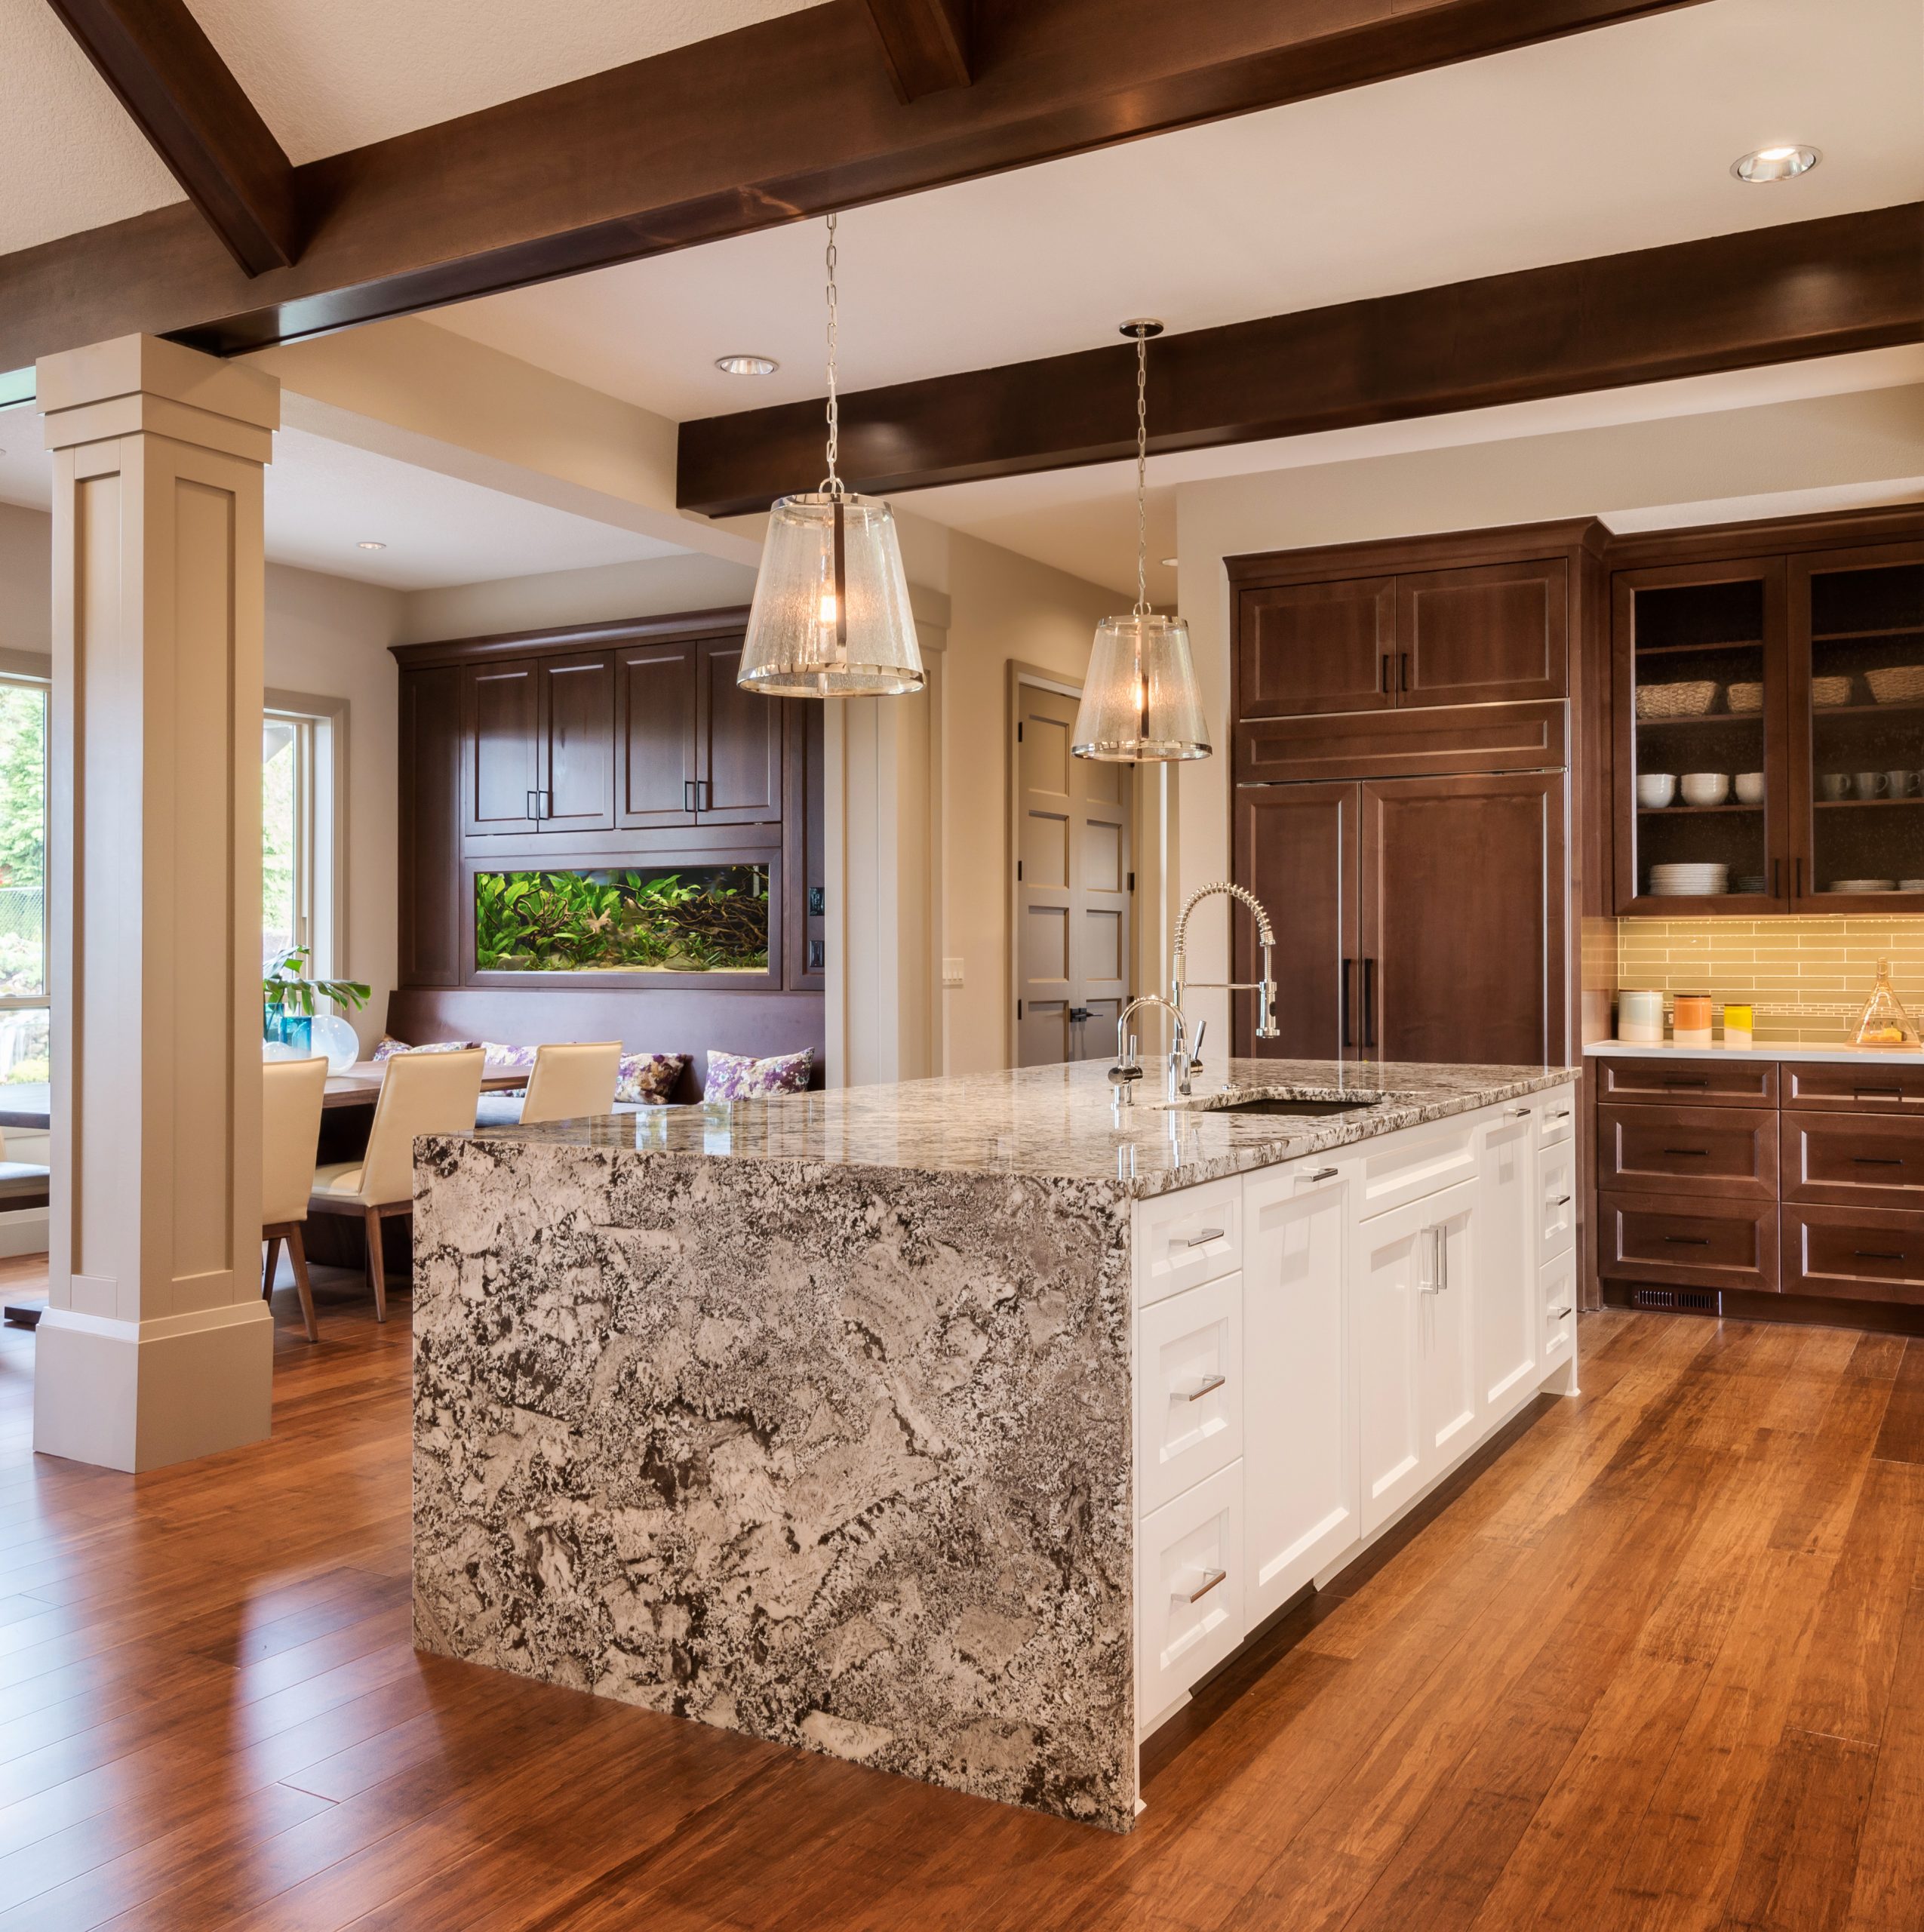 Why granite is great for kitchen countertops, Blog